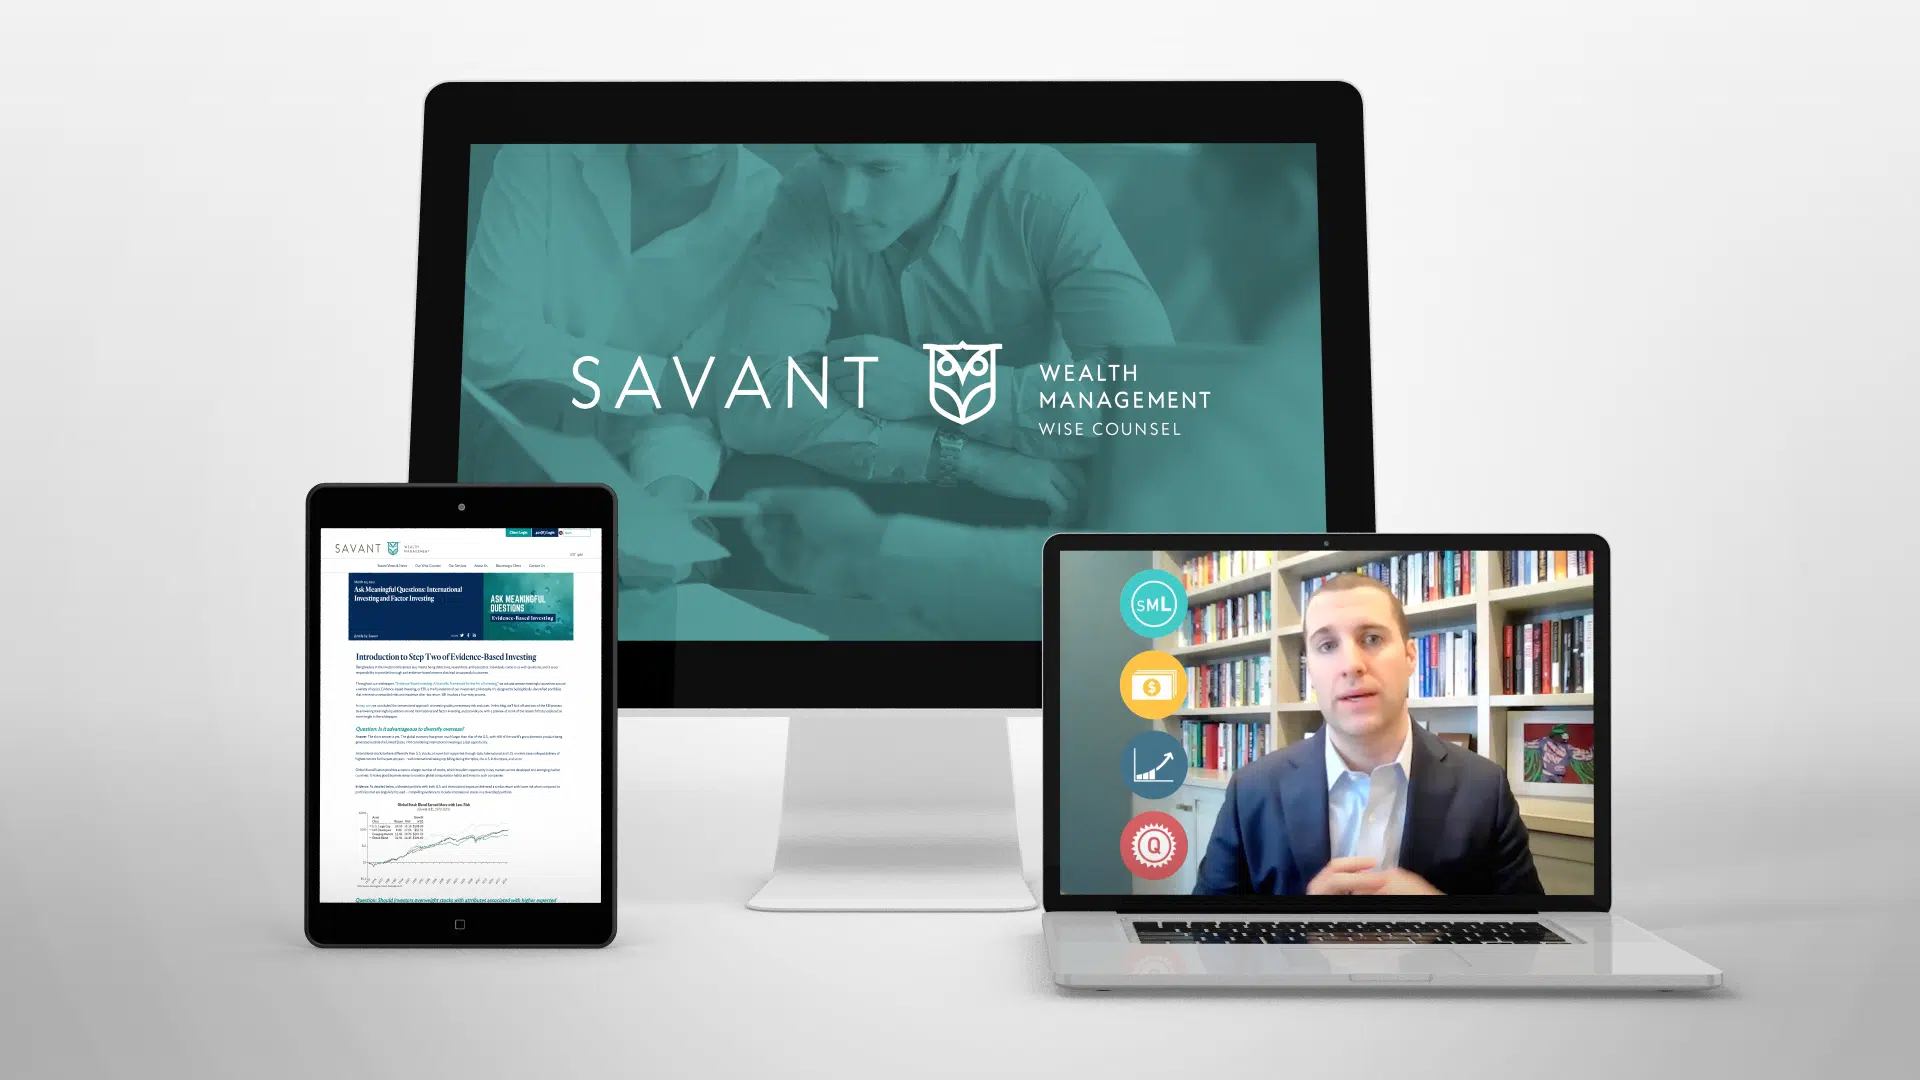 Savant video library on multiple devices